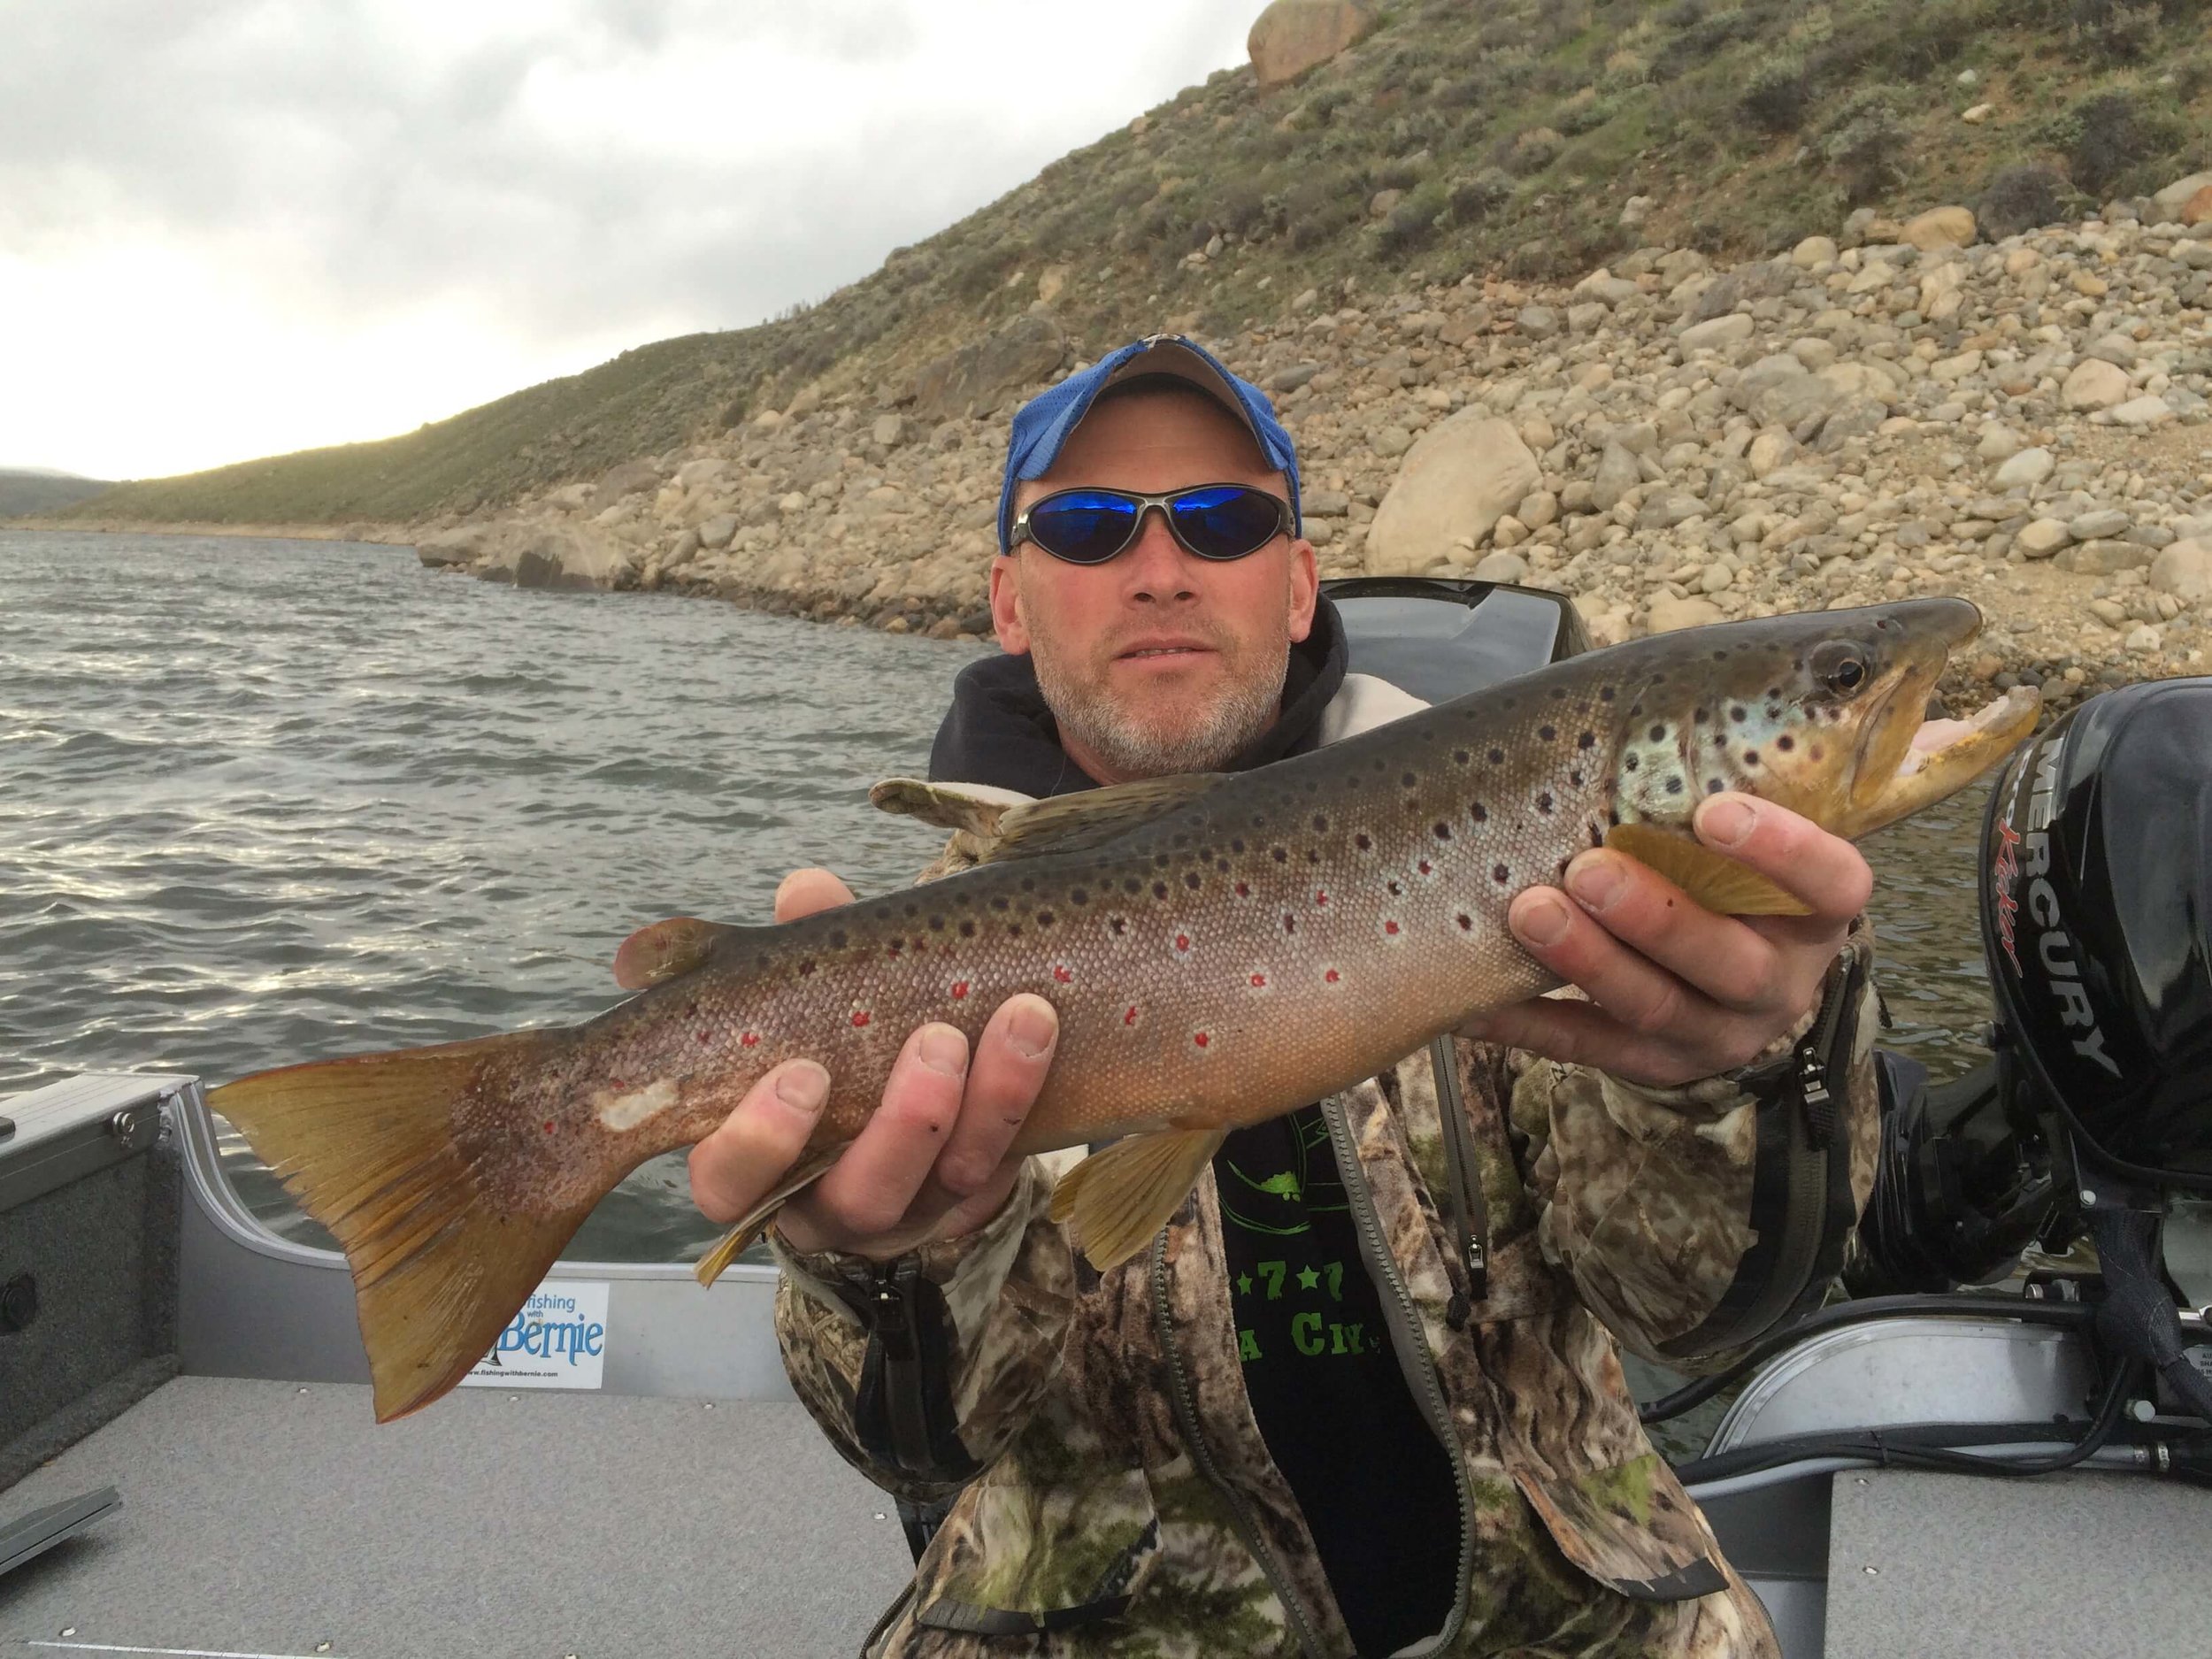  WELCOME   Fishing With Bernie   Call  (303) 956-3804  Get ready for the experience of a lifetime!    Book Your Trip   